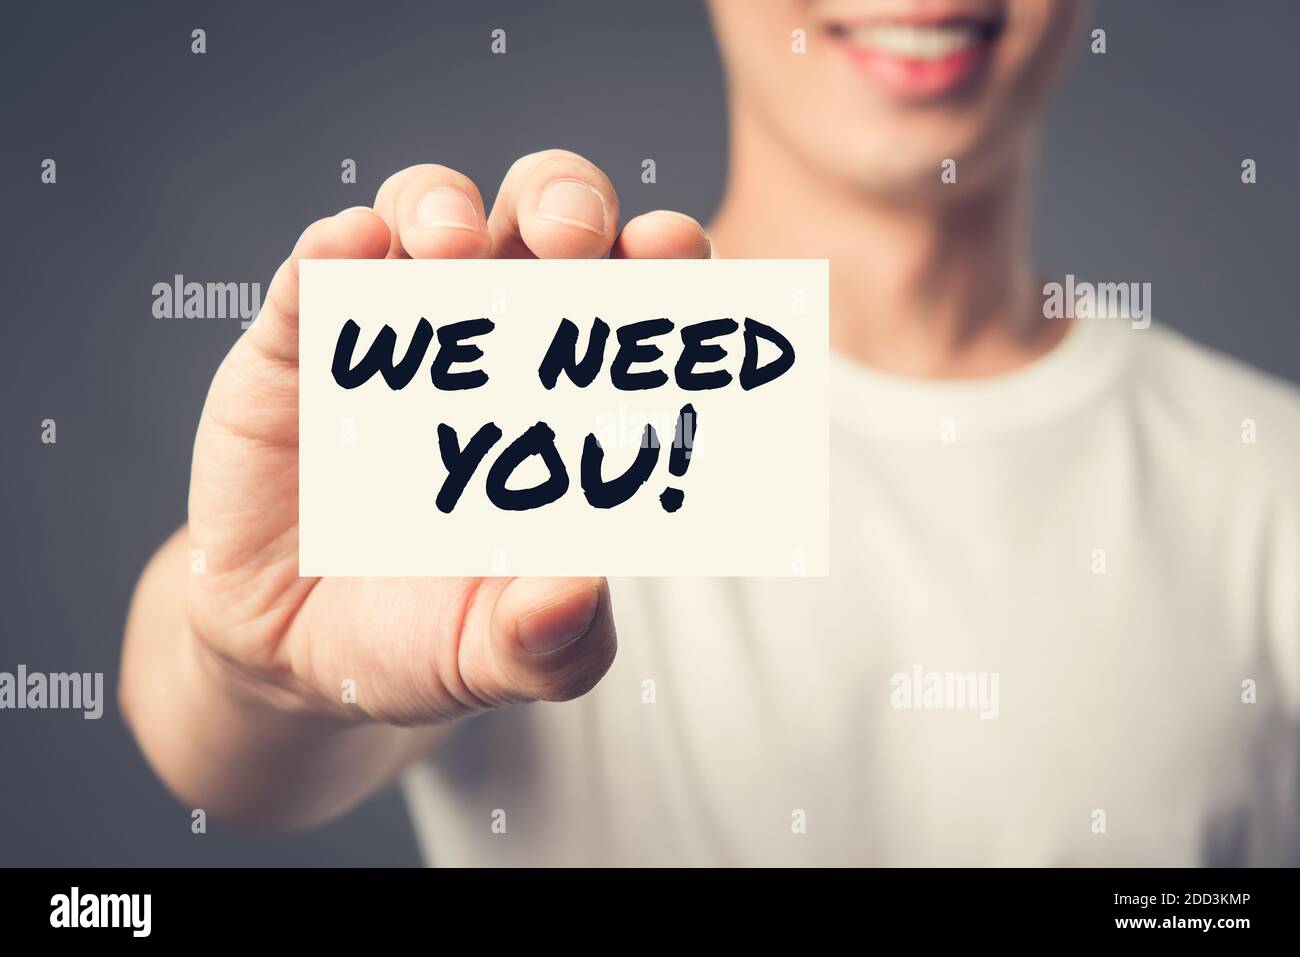 WE NEED YOU! message on the card shown by a man, vintage tone effect Stock Photo